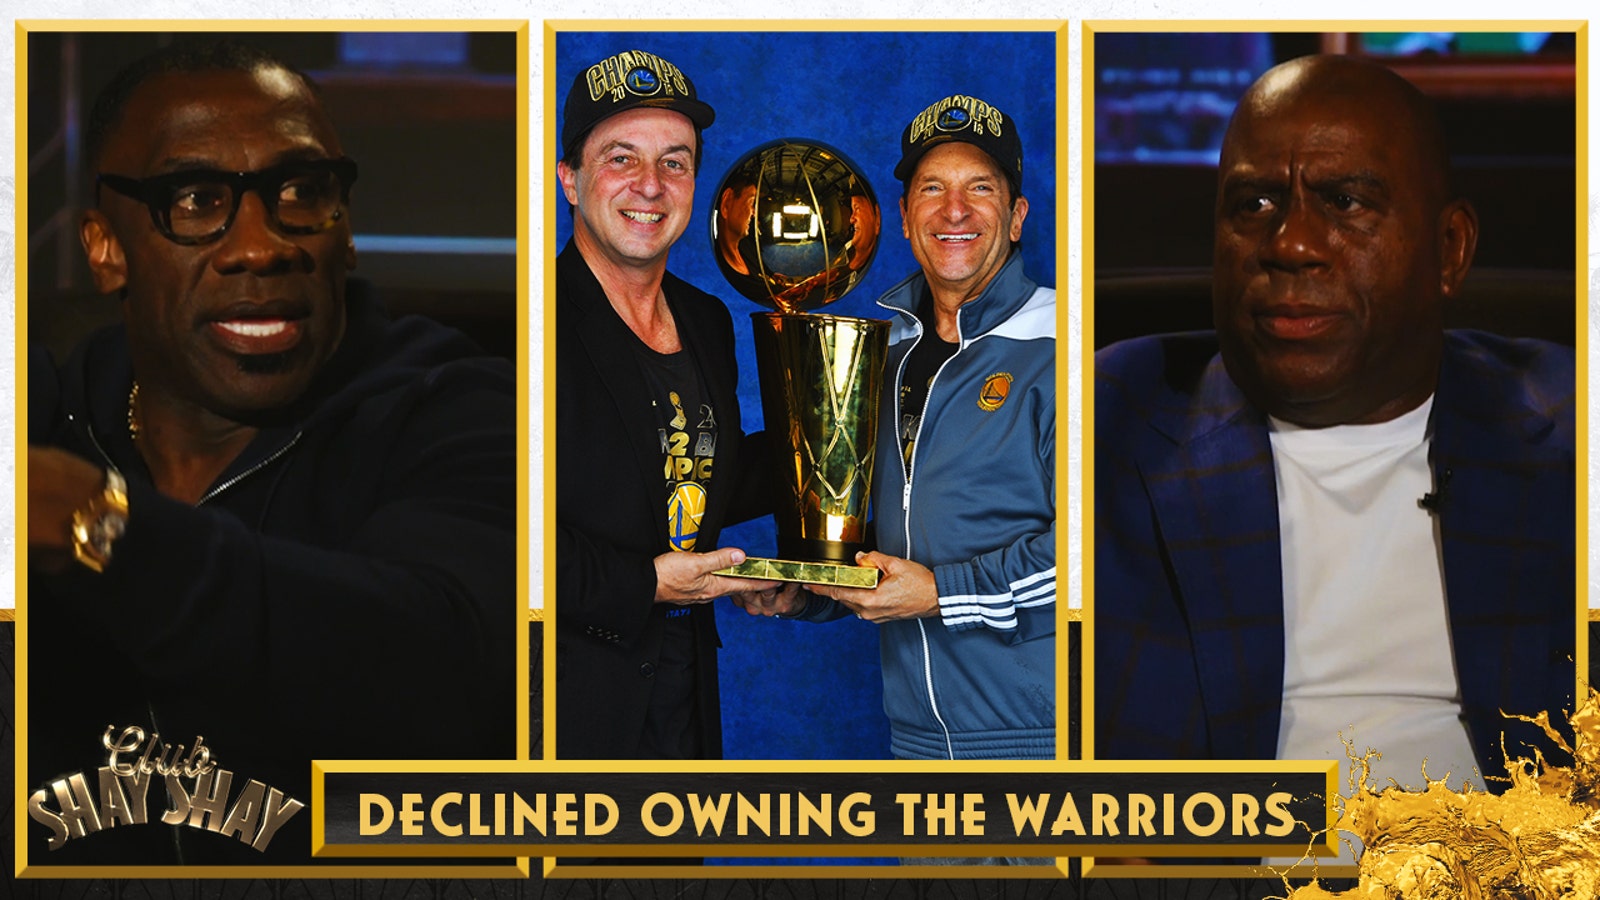 Magic Johnson declined owning the Warriors because of his love for Lakers